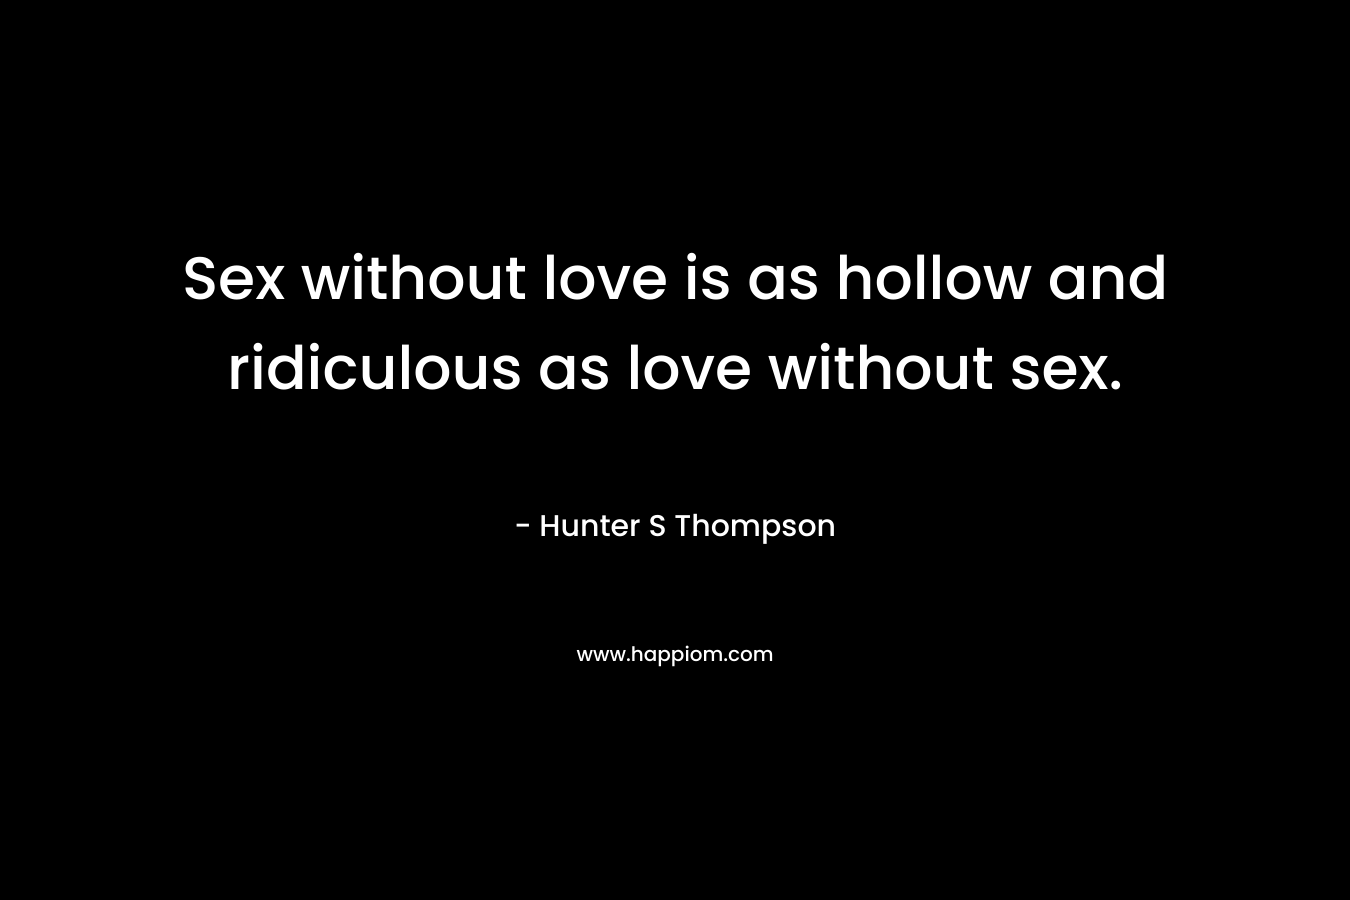 Sex without love is as hollow and ridiculous as love without sex.